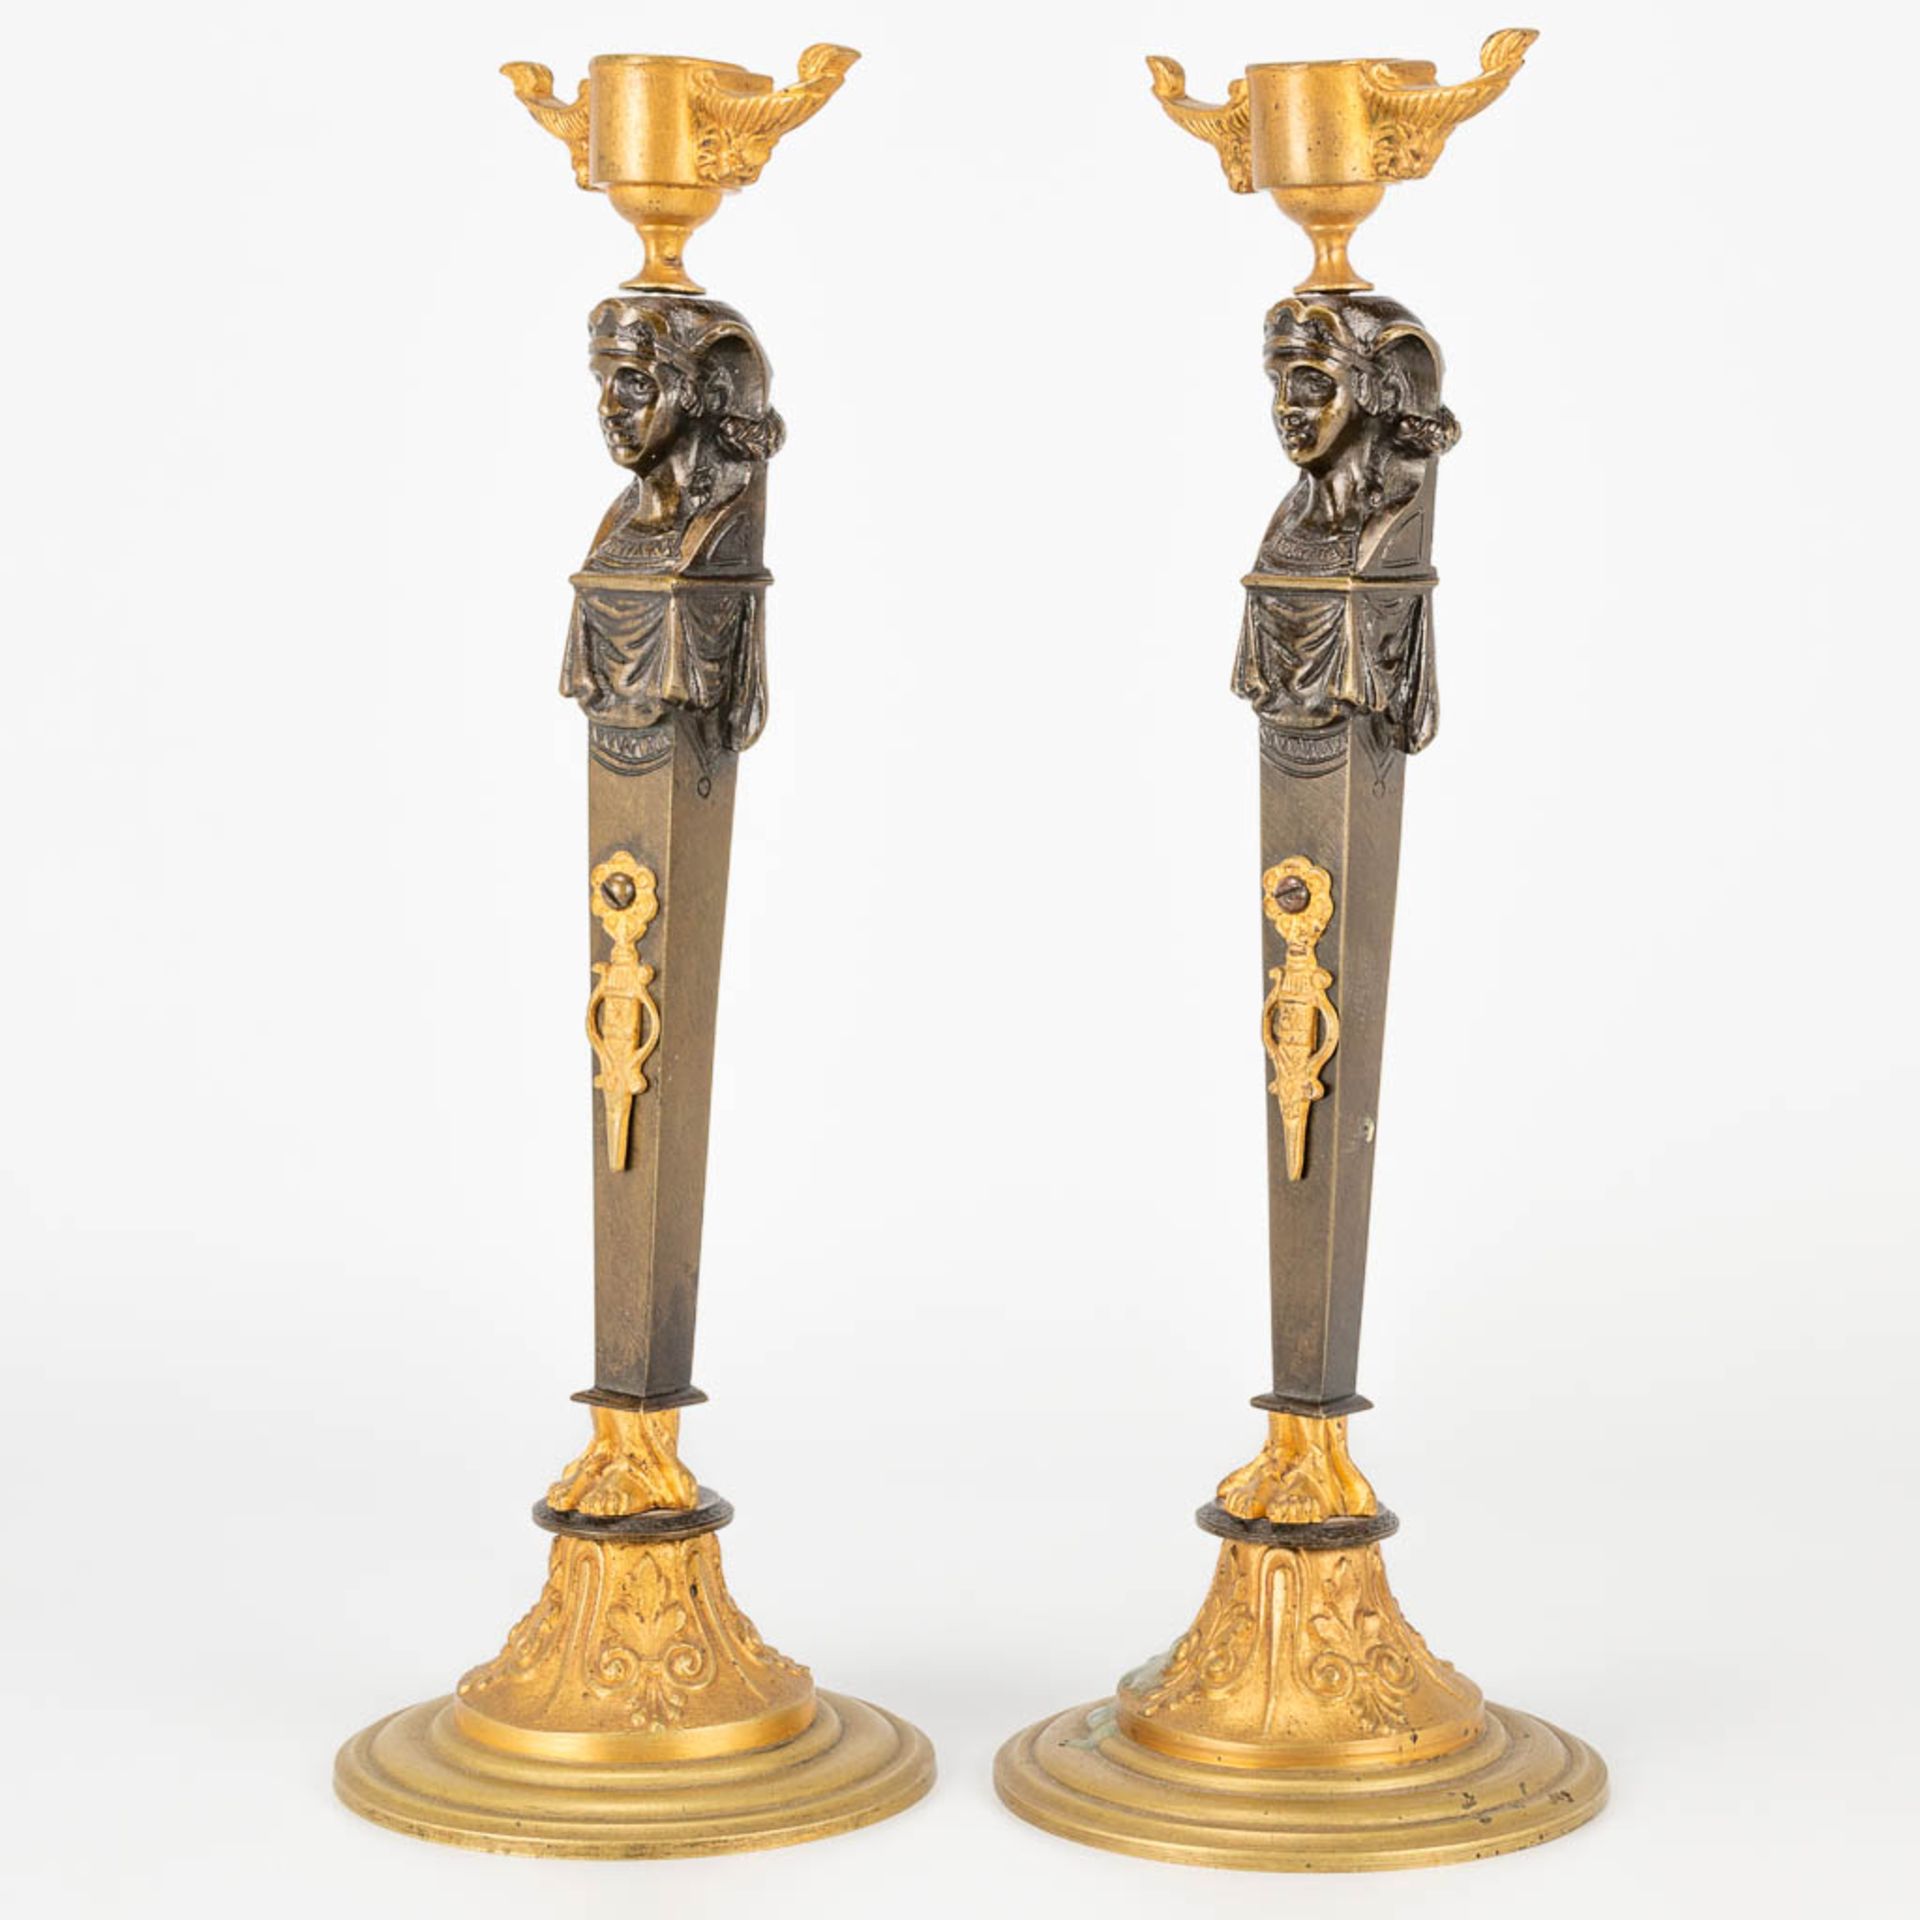 A pair of candlesticks made of gilt and patinated bronze in empire style. (27,5 x 9,5 cm) - Image 6 of 15